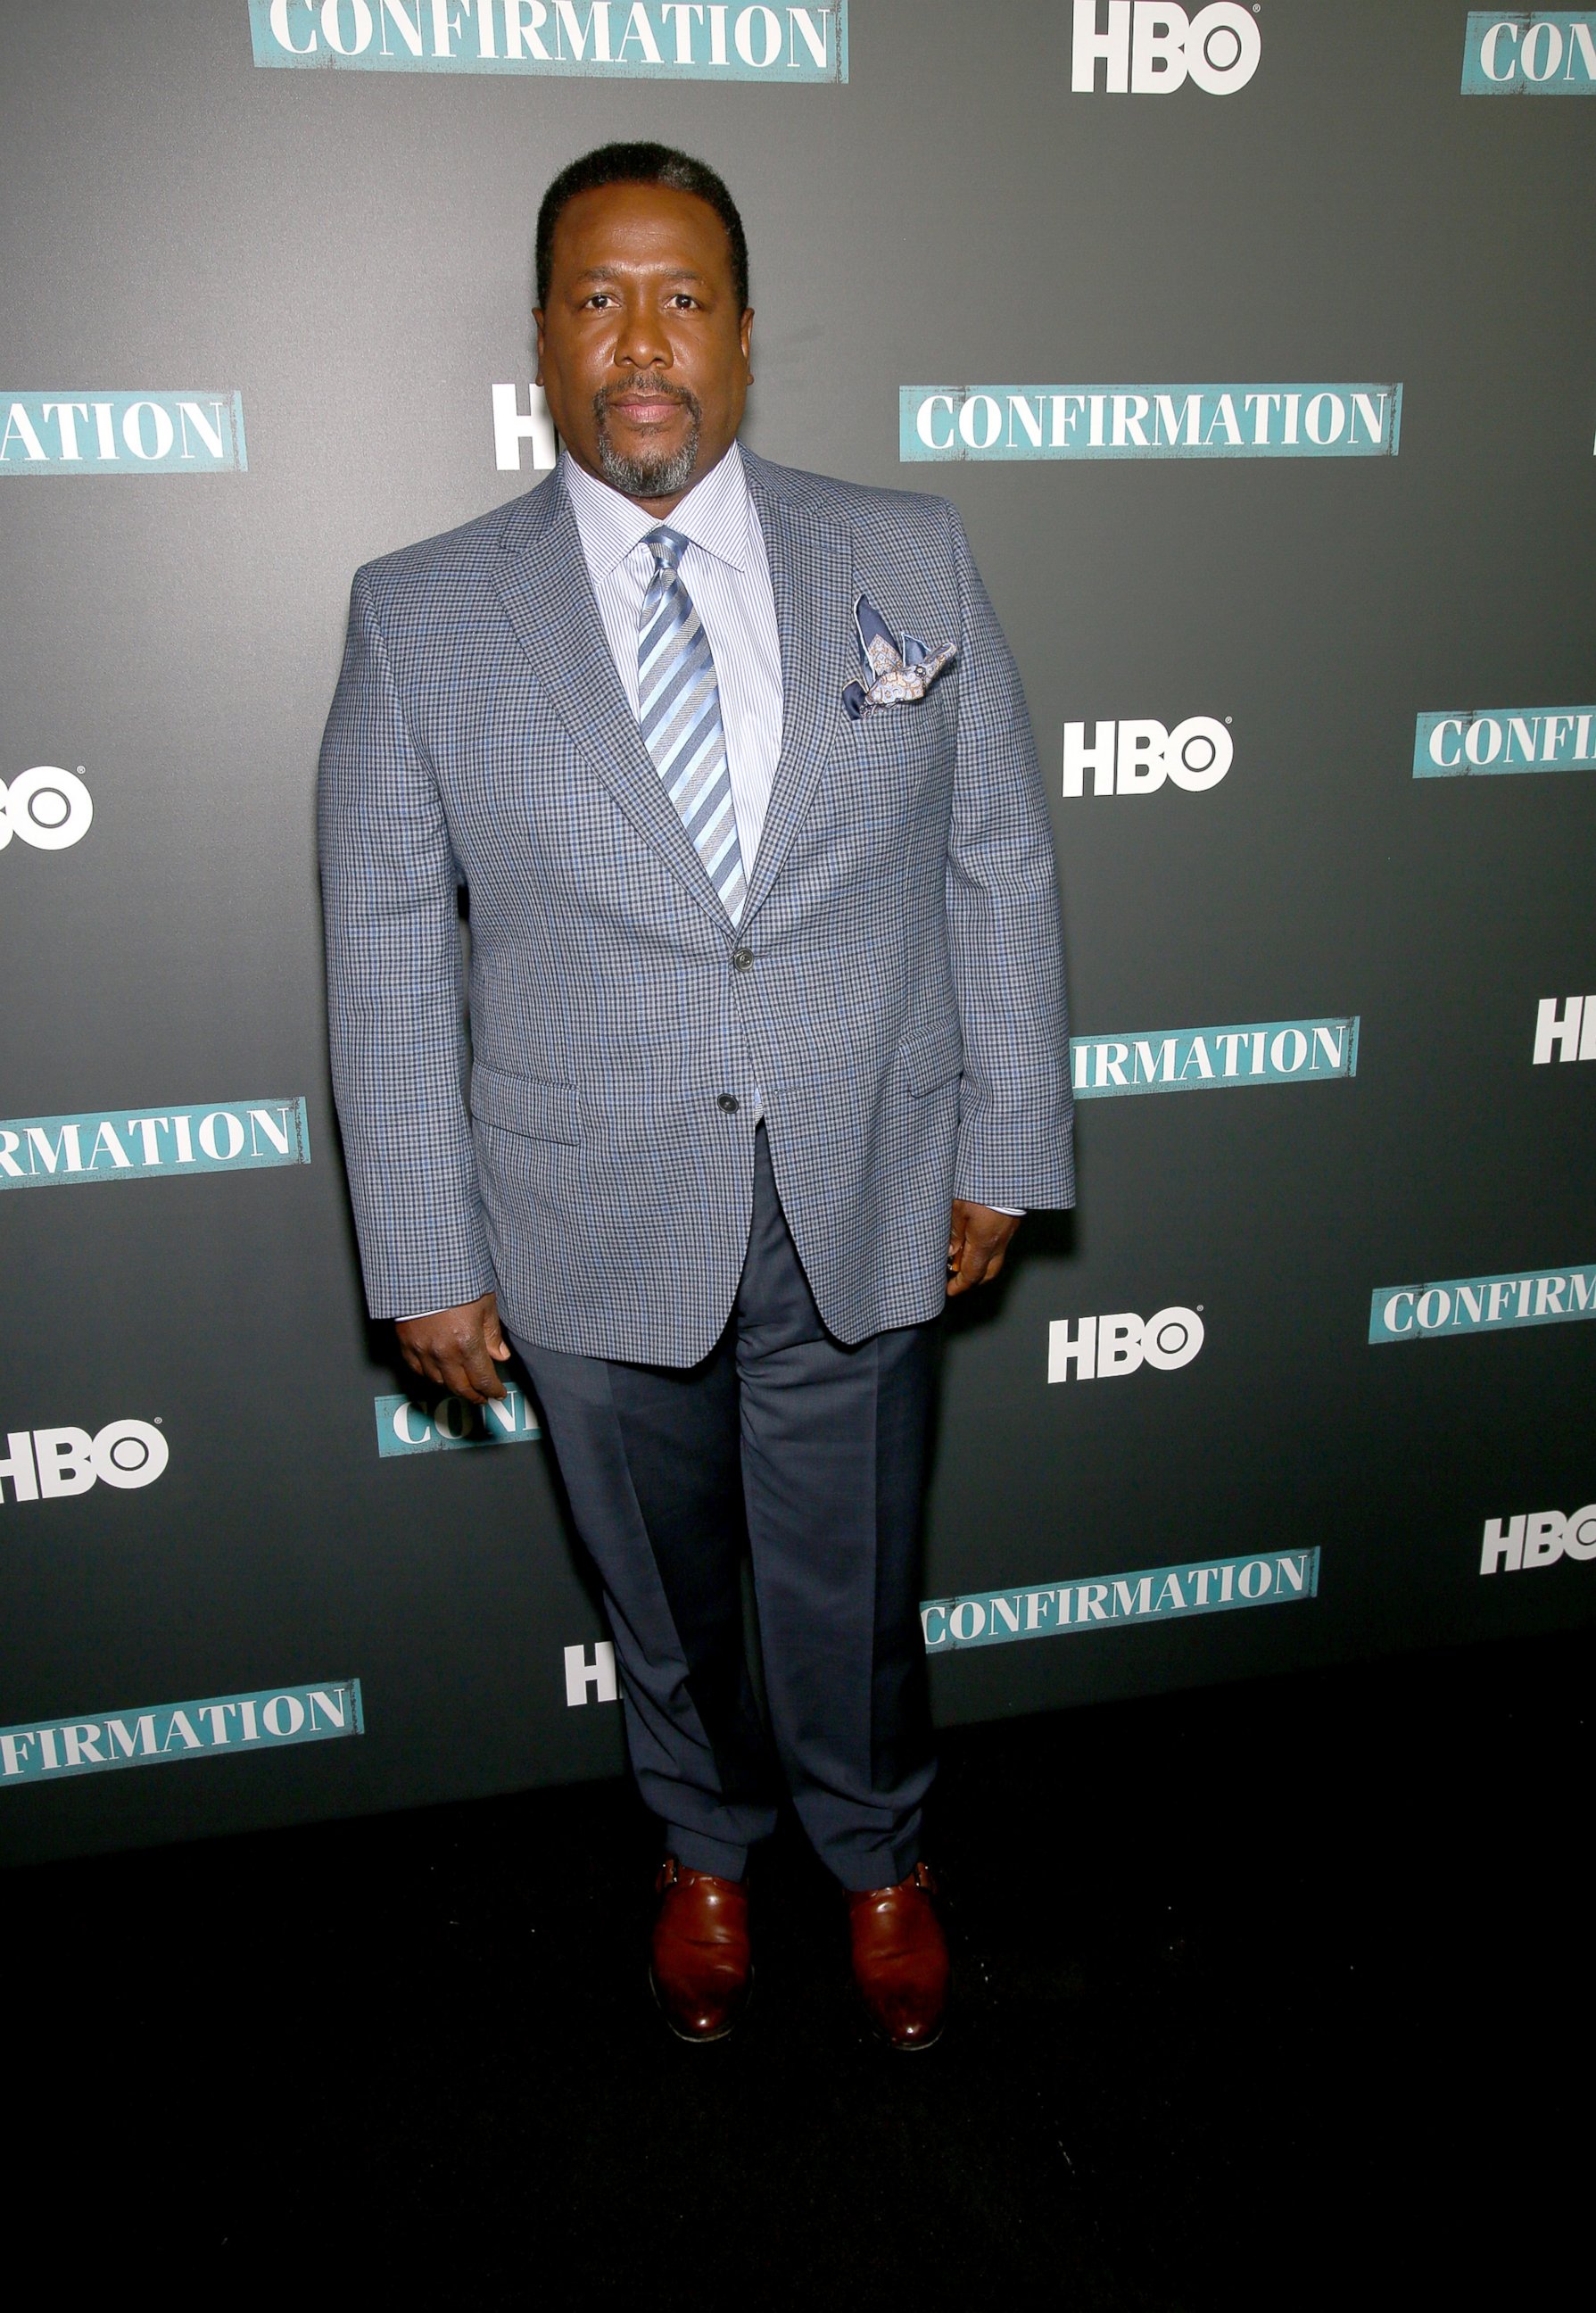 PHOTO: Wendell Pierce poses at the NYC Special Screening of HBO Film "Confirmation" at Signature Theater, April 7, 2016 in New York City. 